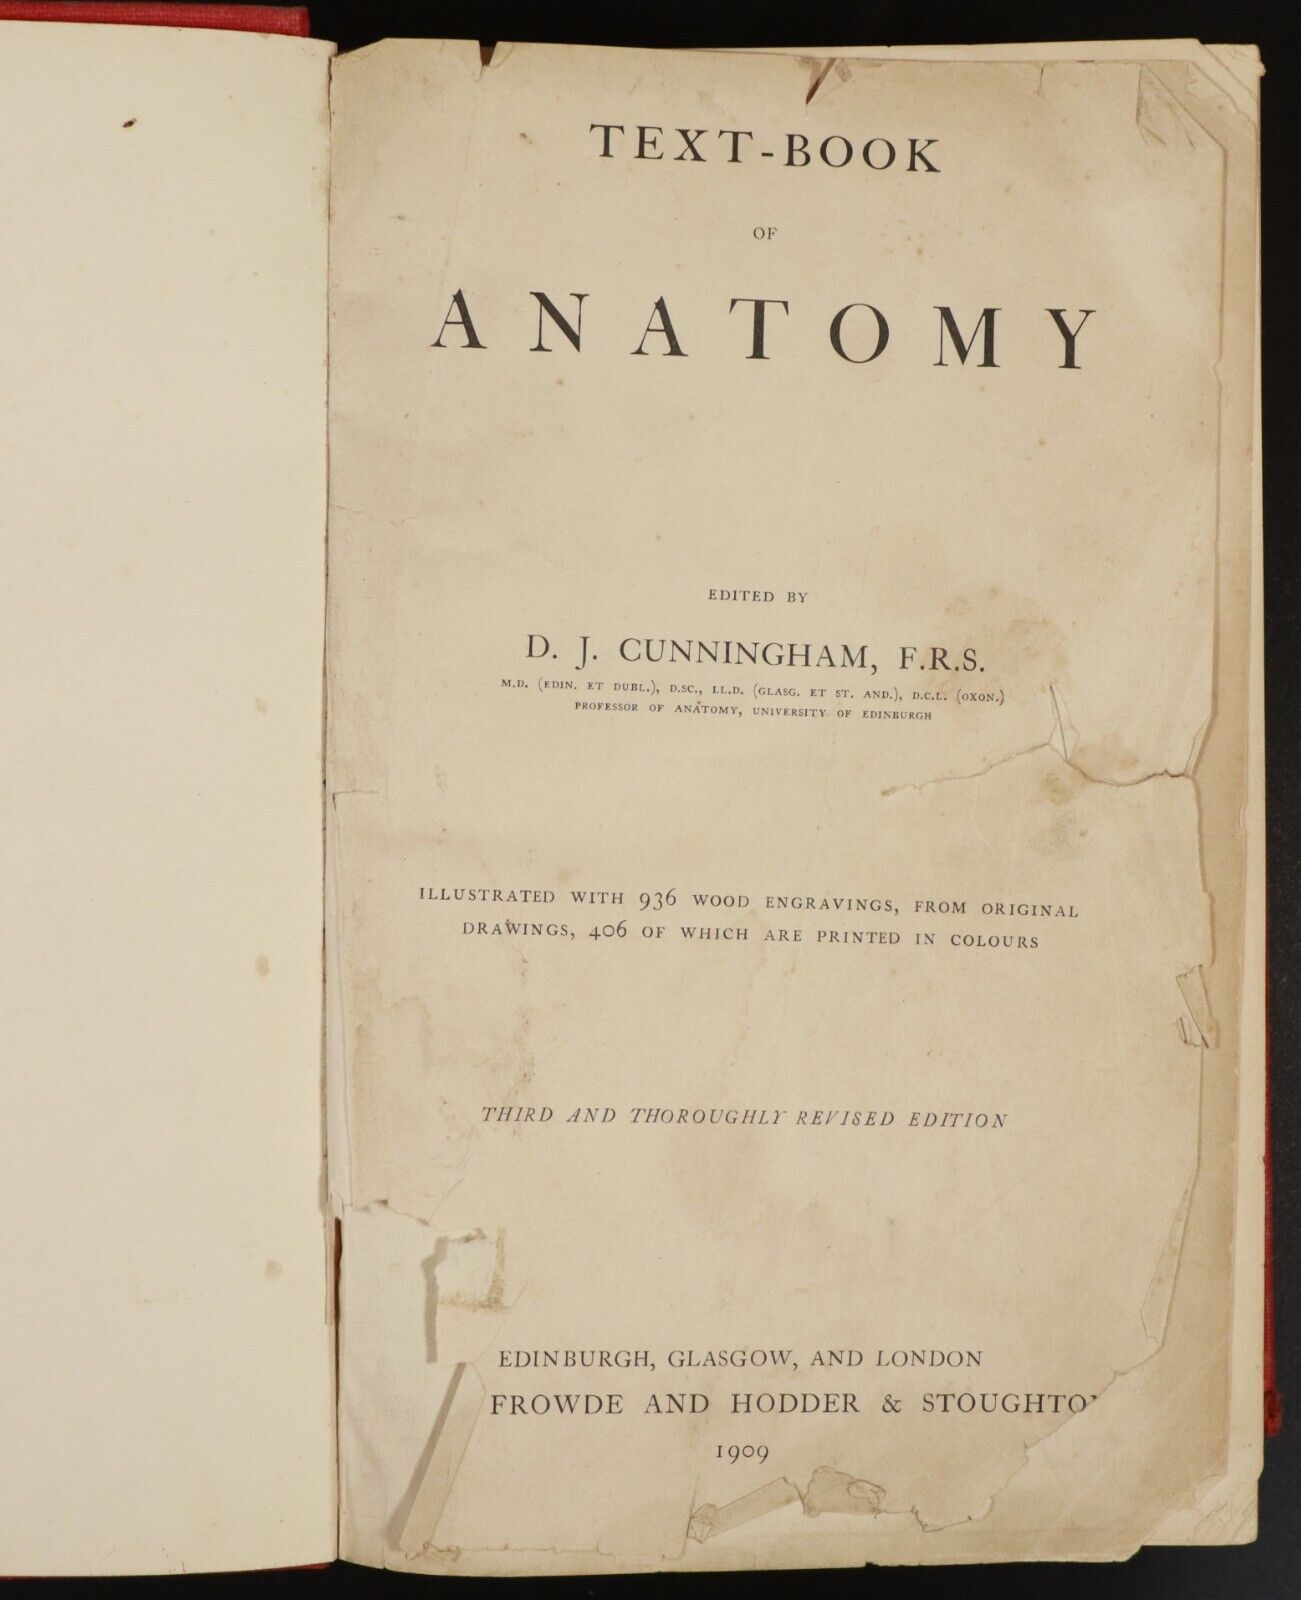 1909 Text-Book Of Anatomy by D.J. Cunningham Antique Medical Reference Book - 0